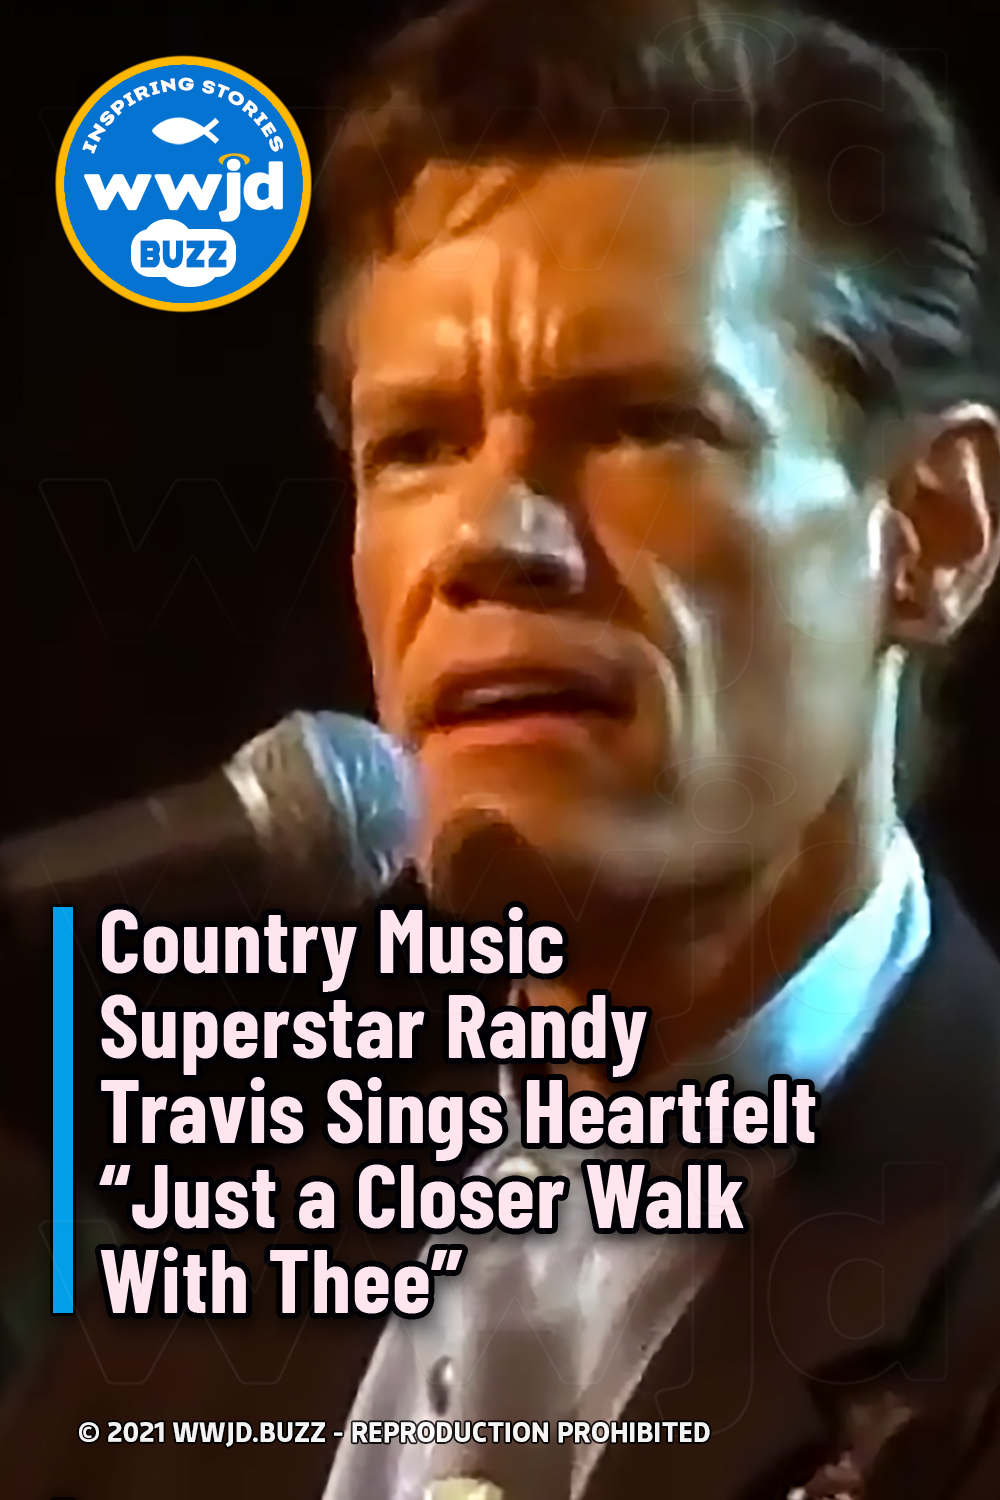 Country Music Superstar Randy Travis Sings Heartfelt “Just a Closer Walk With Thee”